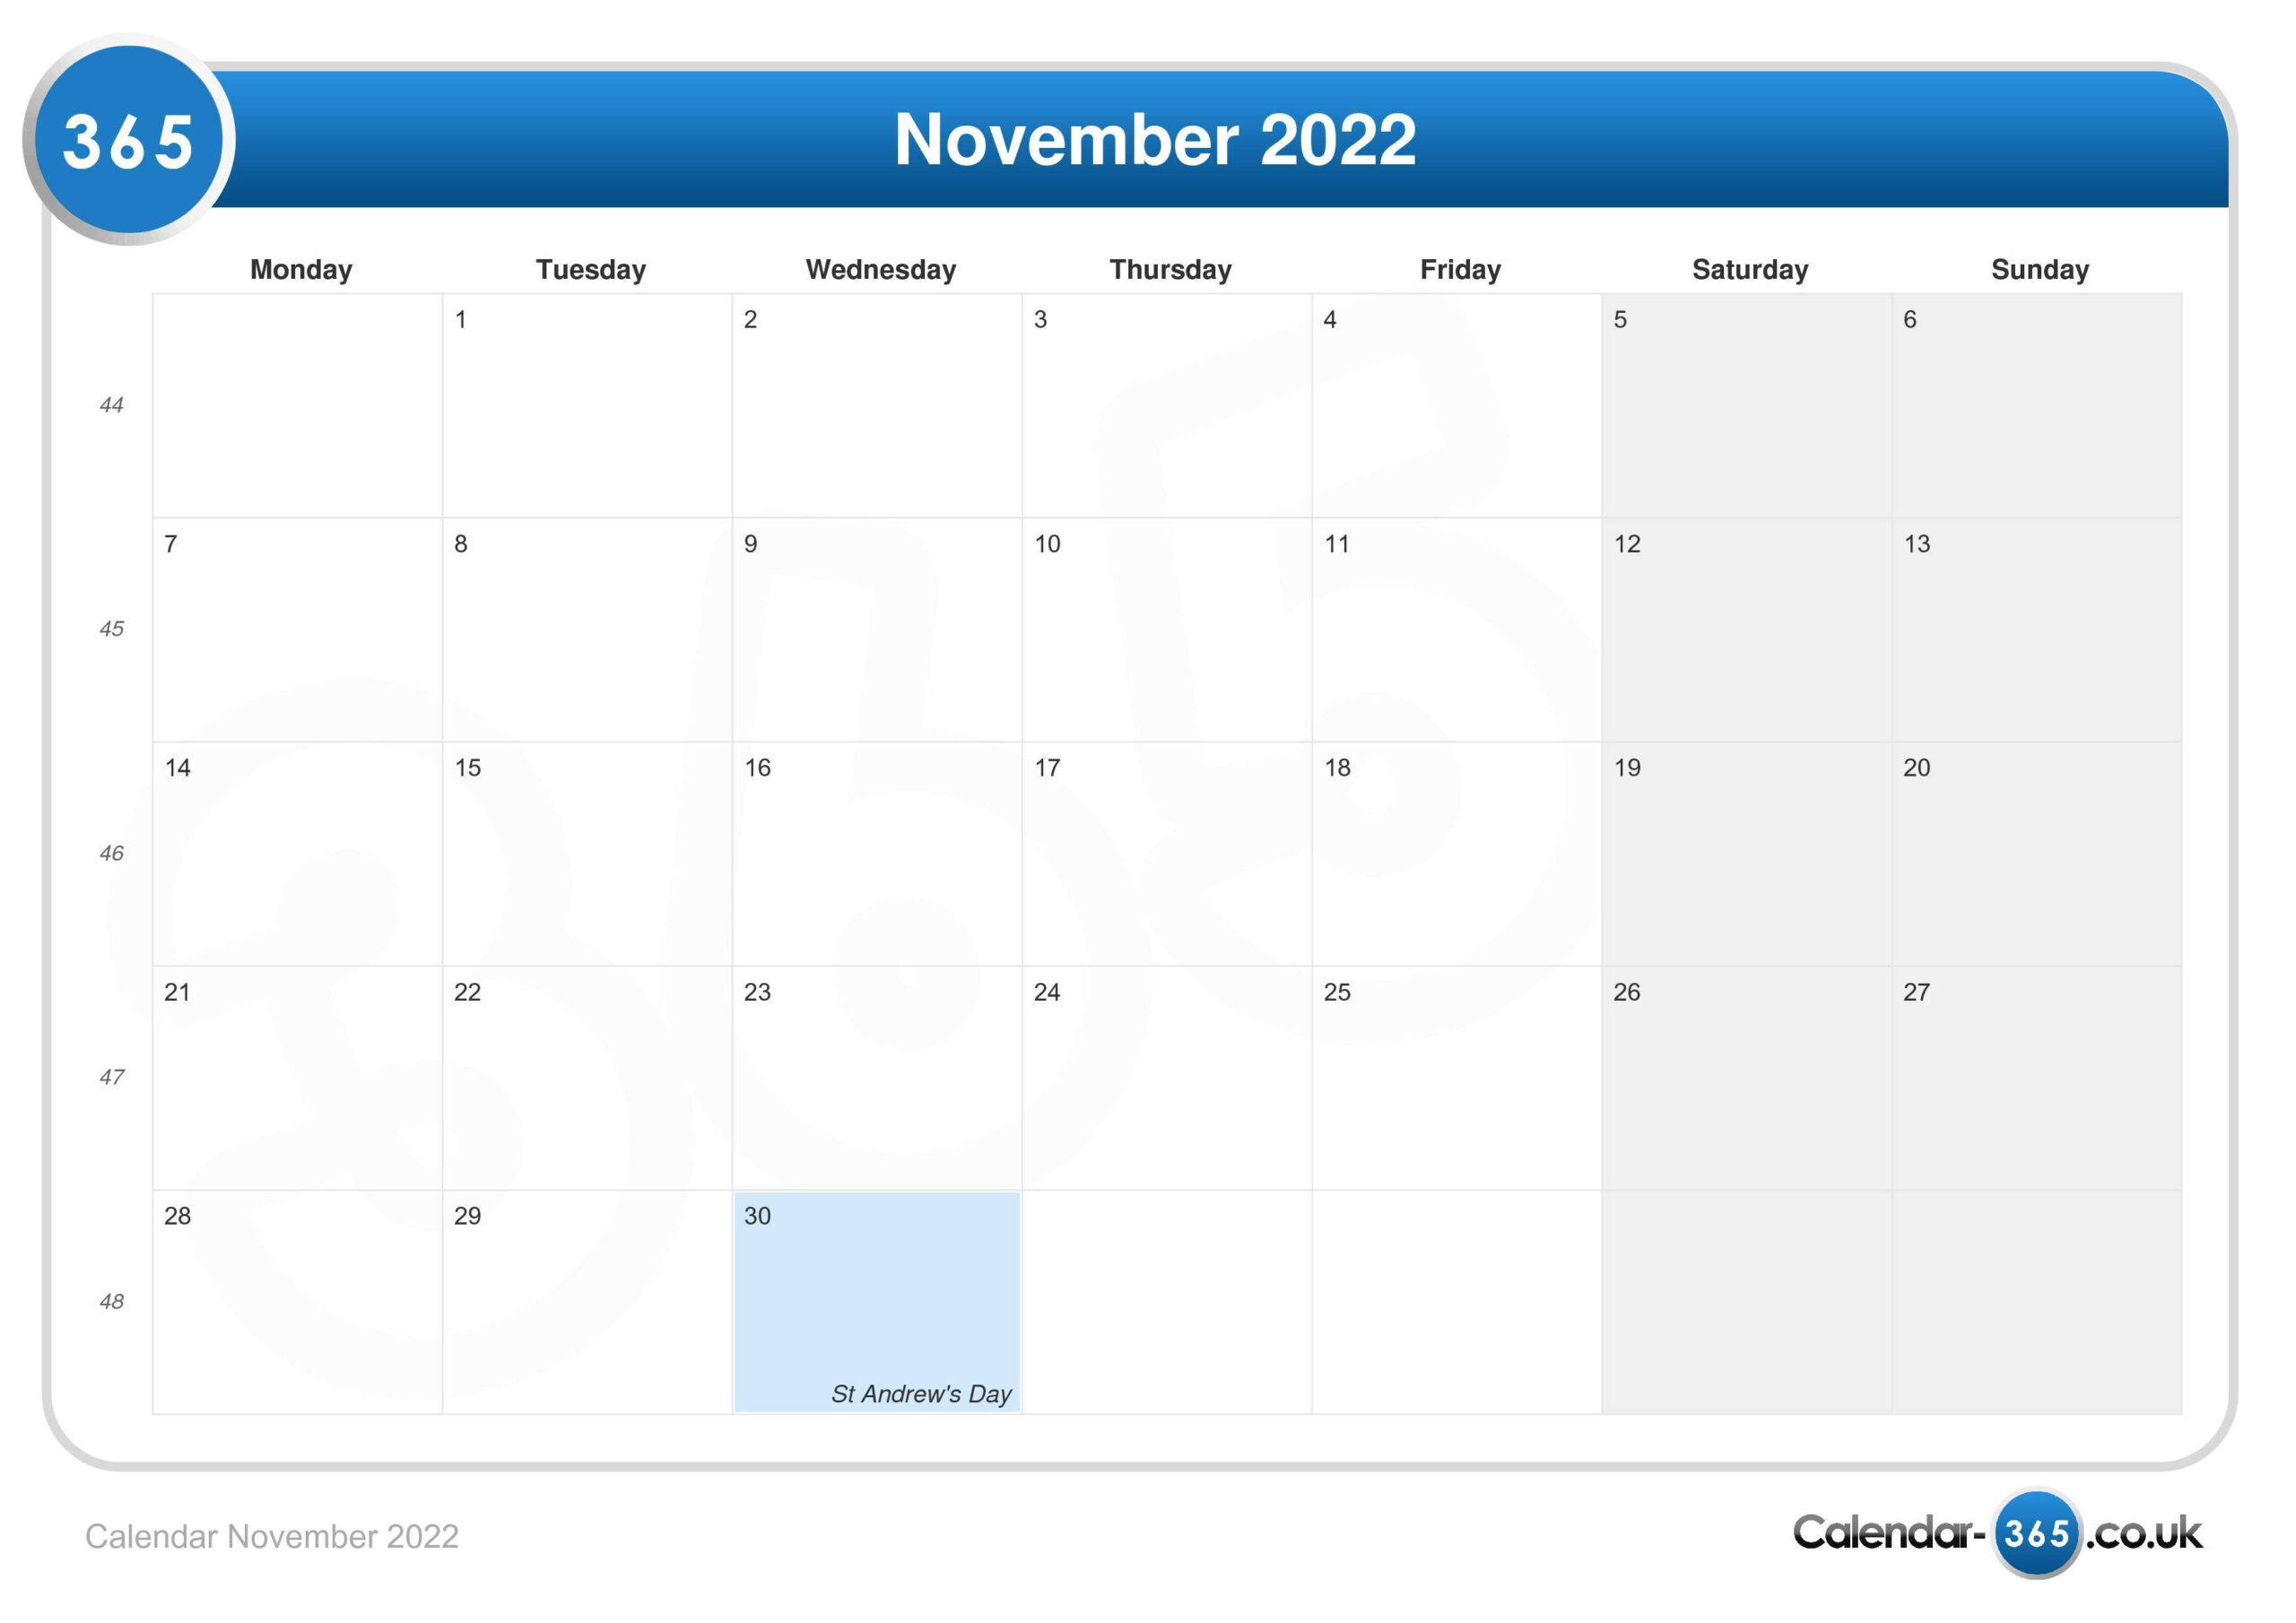 Calendar November 2022  Astronomy Picture Of The Day On October 23 2022